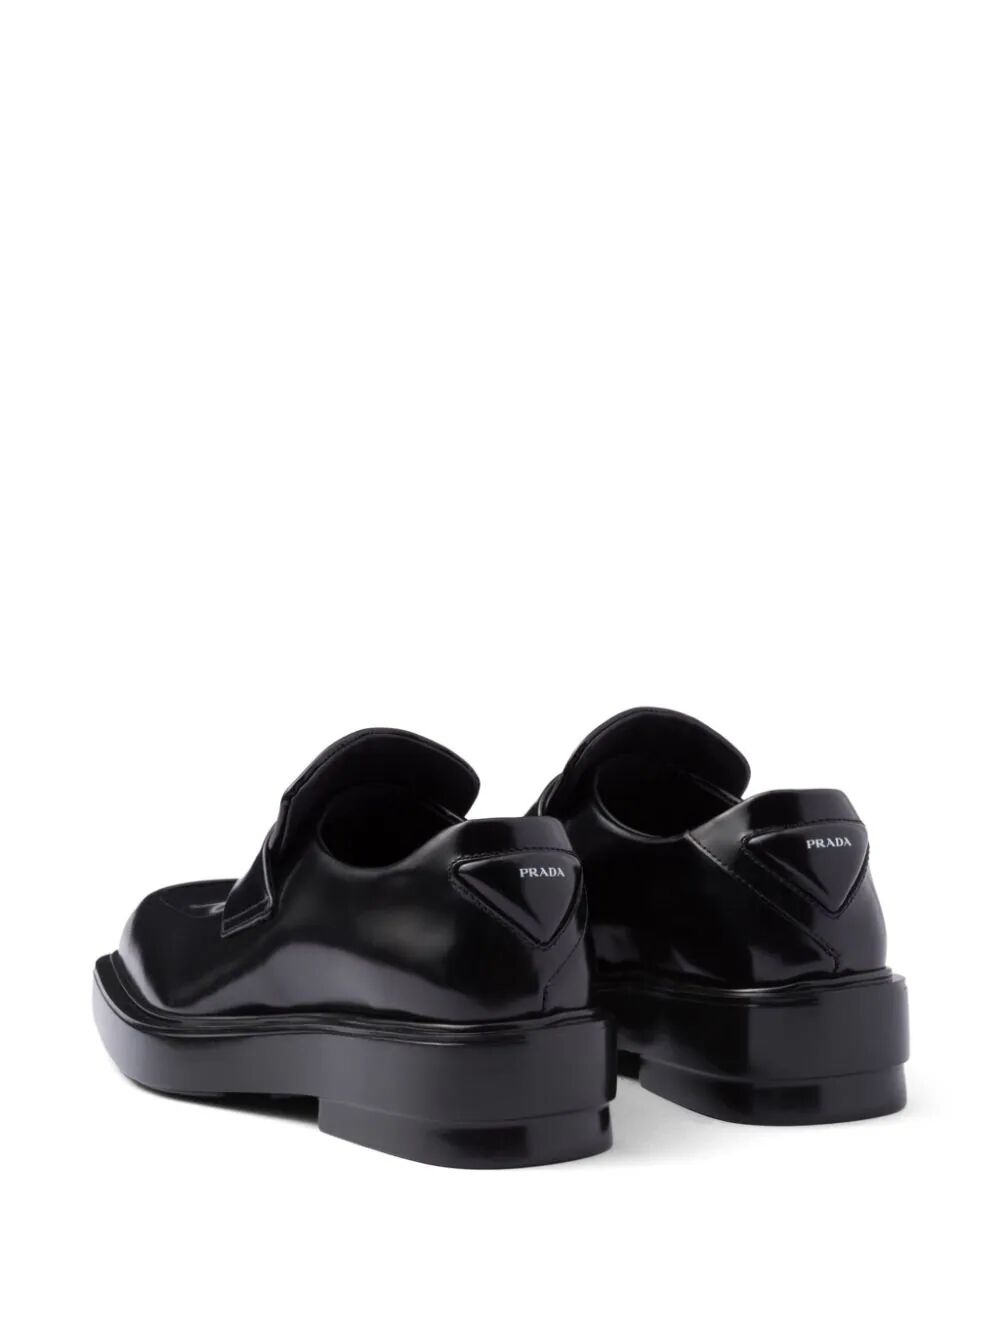 PRADA FENDER SQUARE LEATHER LOAFERS - 14